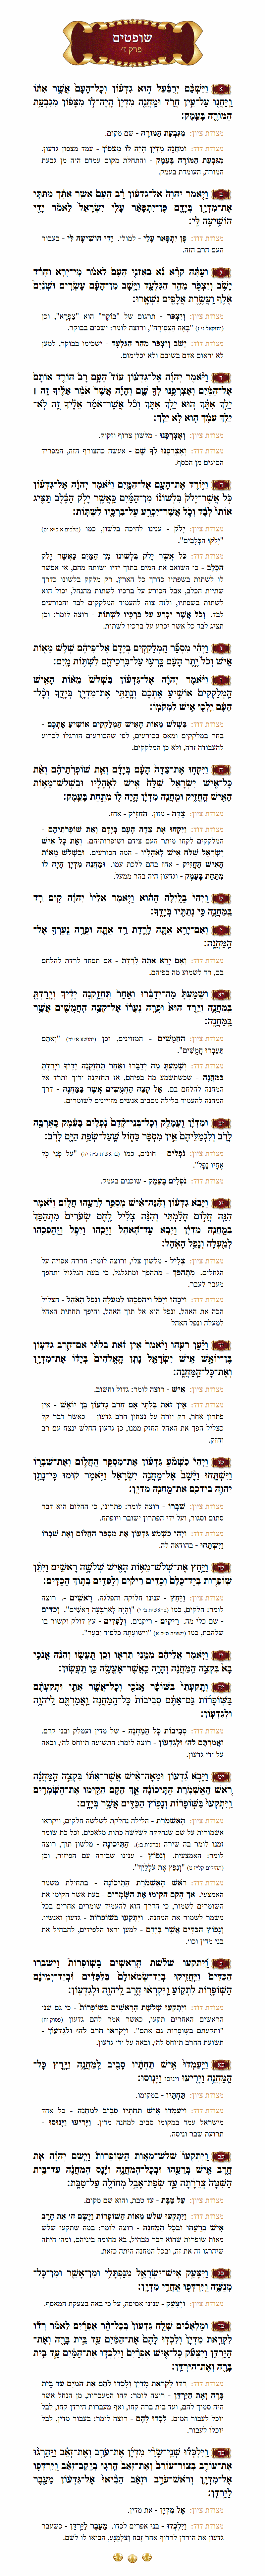 Sefer Shoftim Chapter 7 with commentary